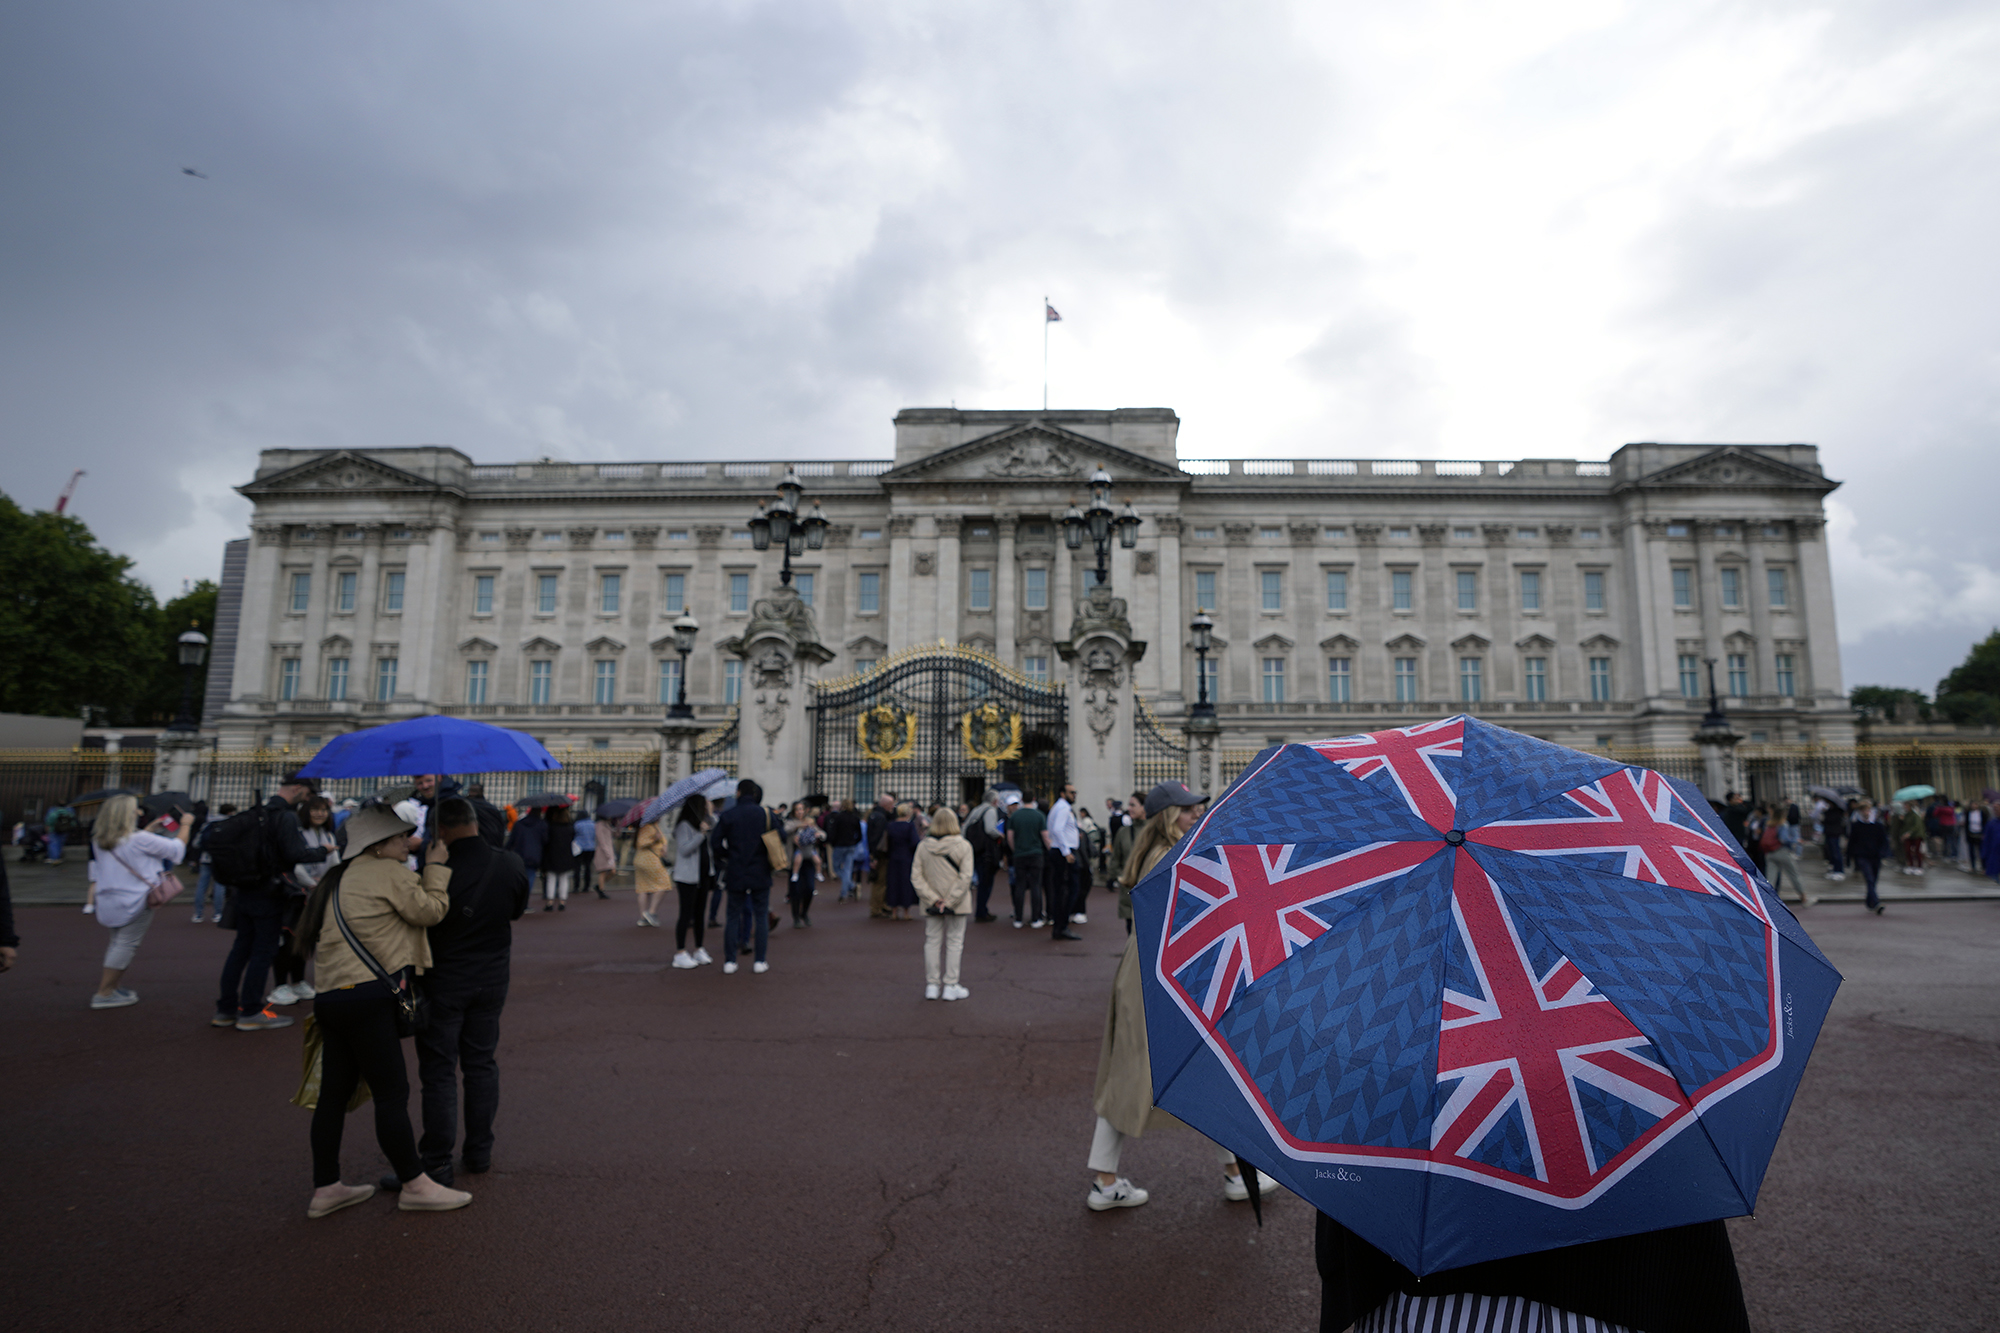 Buckingham Palace in background, people standing outside the gates, some holding umbrellas.